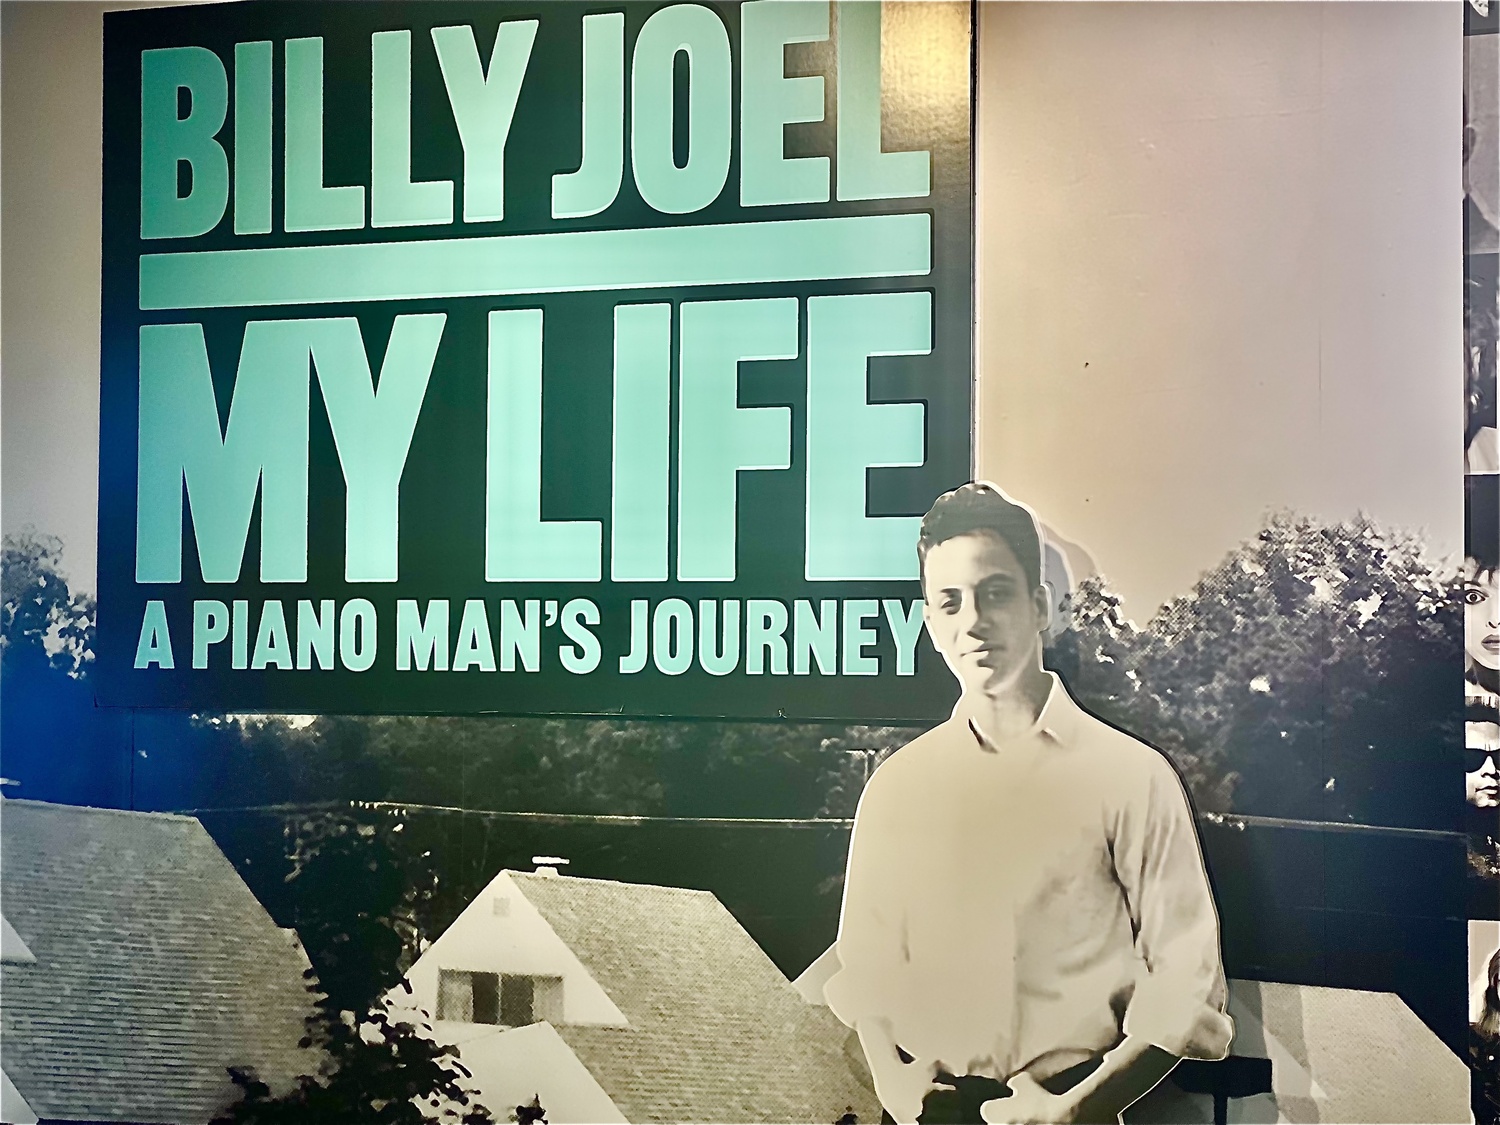 “Billy Joel – My Life, a Piano Man’s Journey” opened recently at the Long Island Music & Entertainment Hall of Fame in Stony Brook. LEAH CHIAPPINO